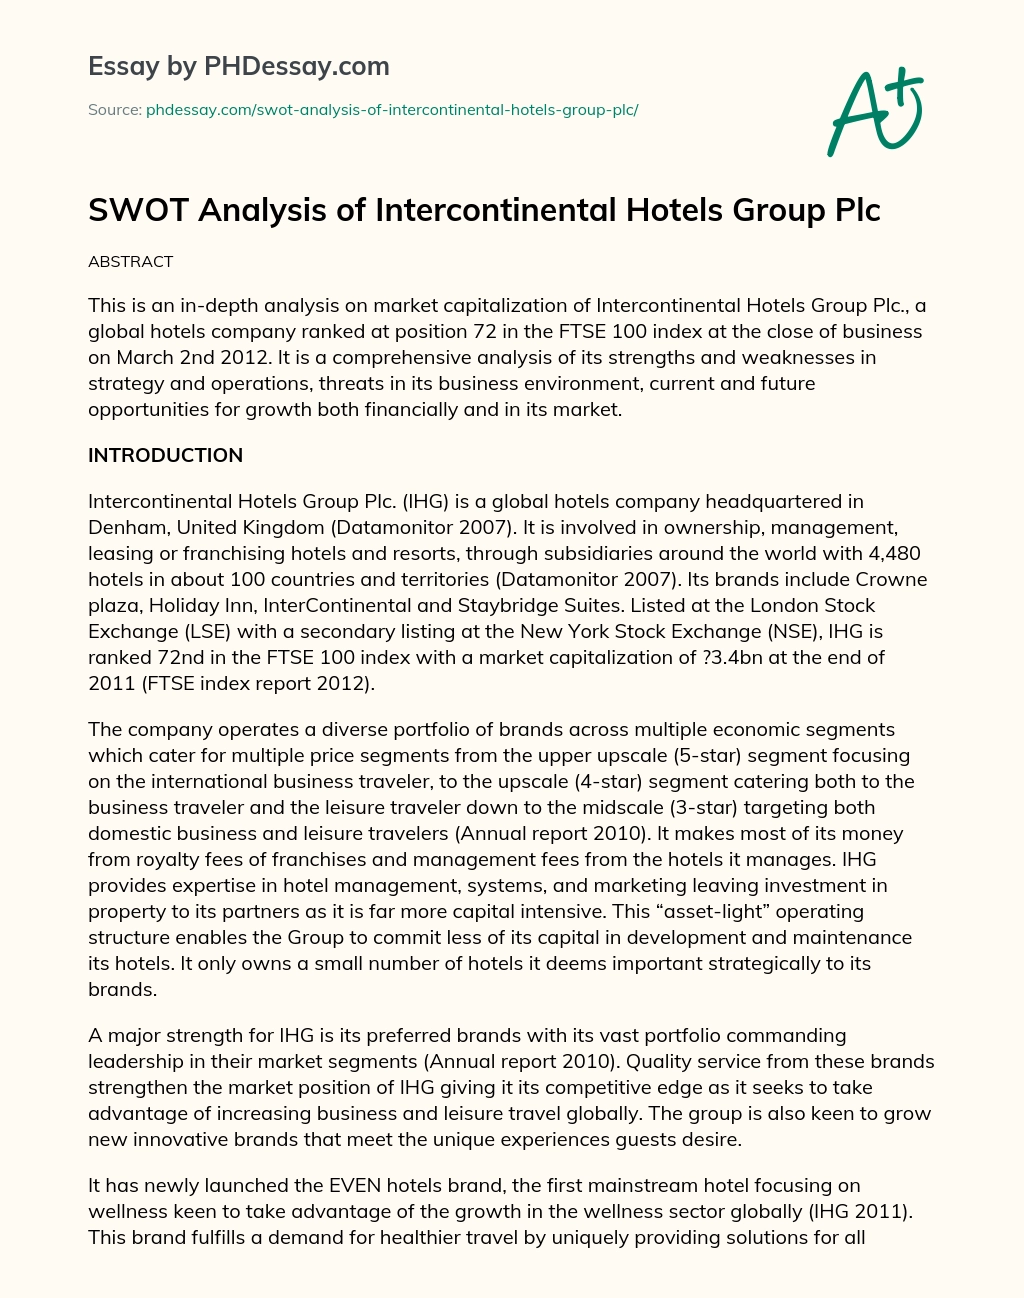 SWOT Analysis of Intercontinental Hotels Group Plc essay